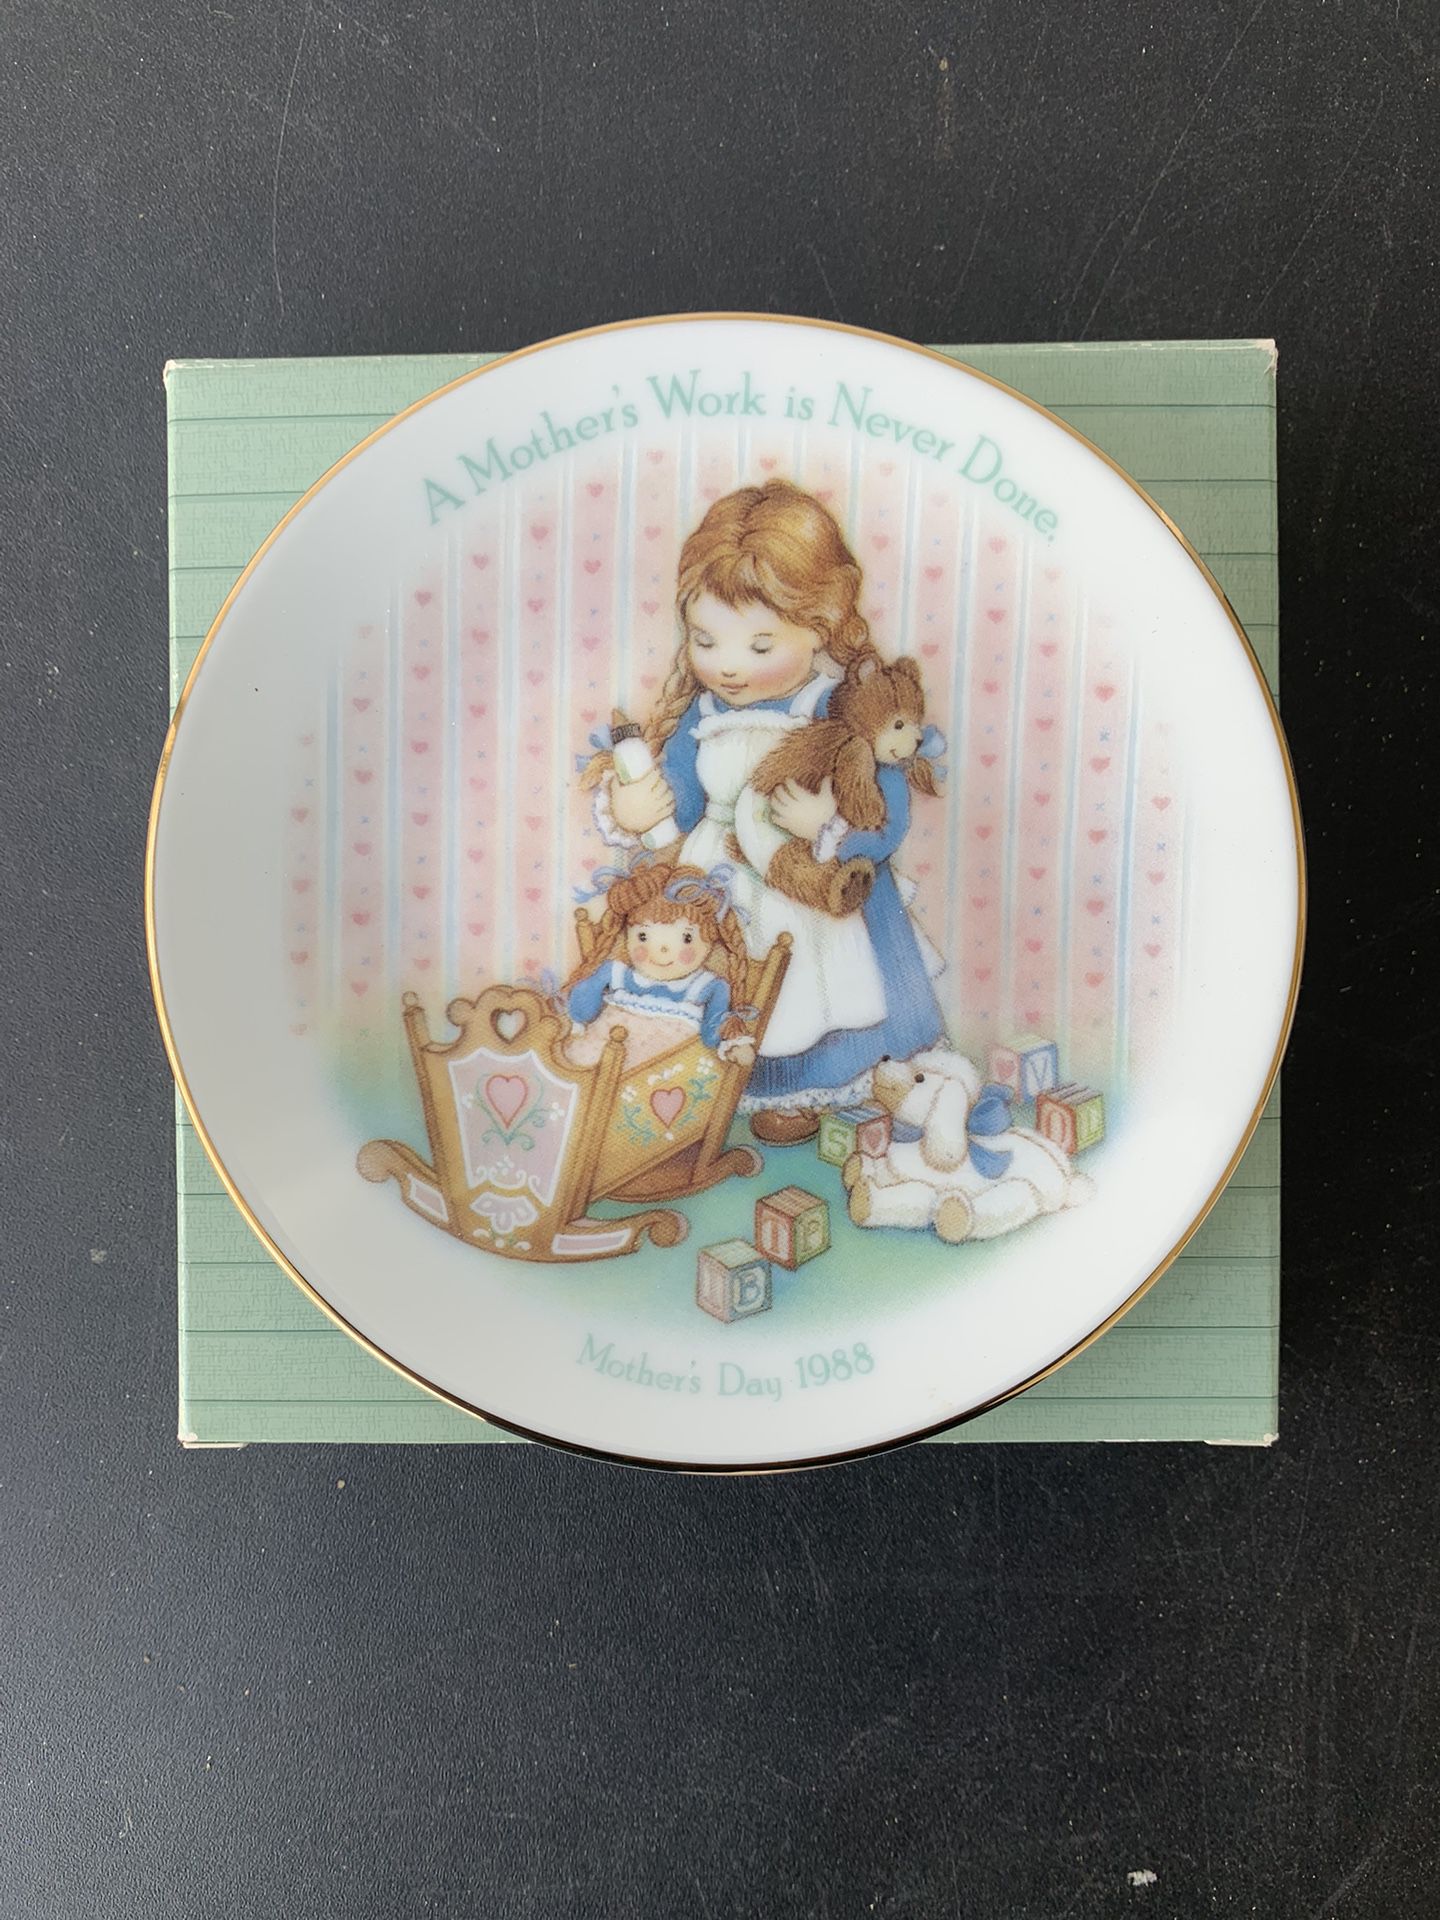 AVON "A Mother's Work Is Never Done 1988 MOTHERS DAY PLATE - NEW